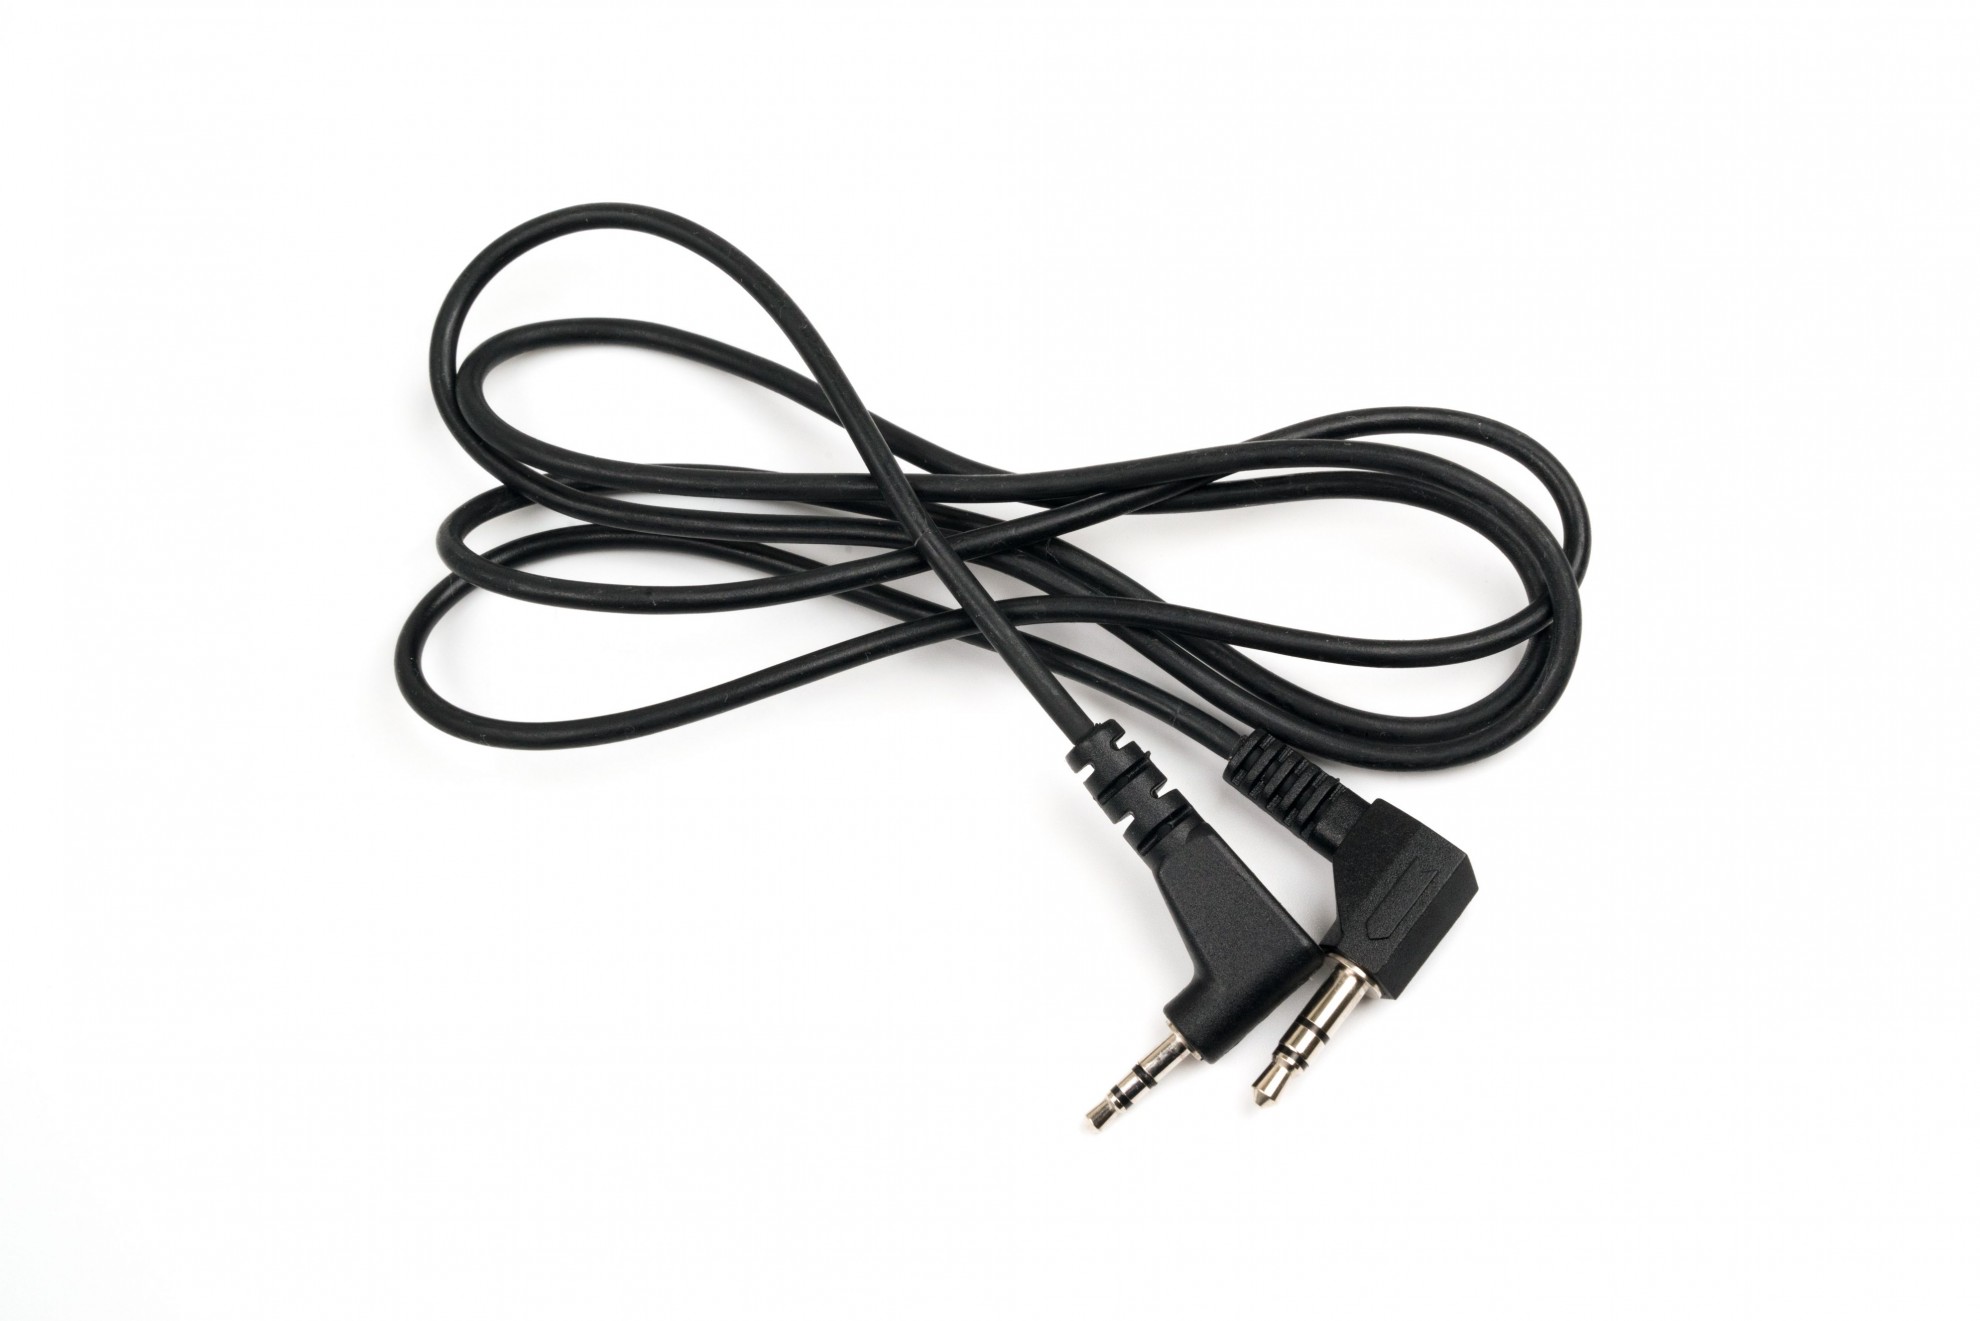 3.5mm Mini Stereo Audio Cable with two Right-Angle plugs